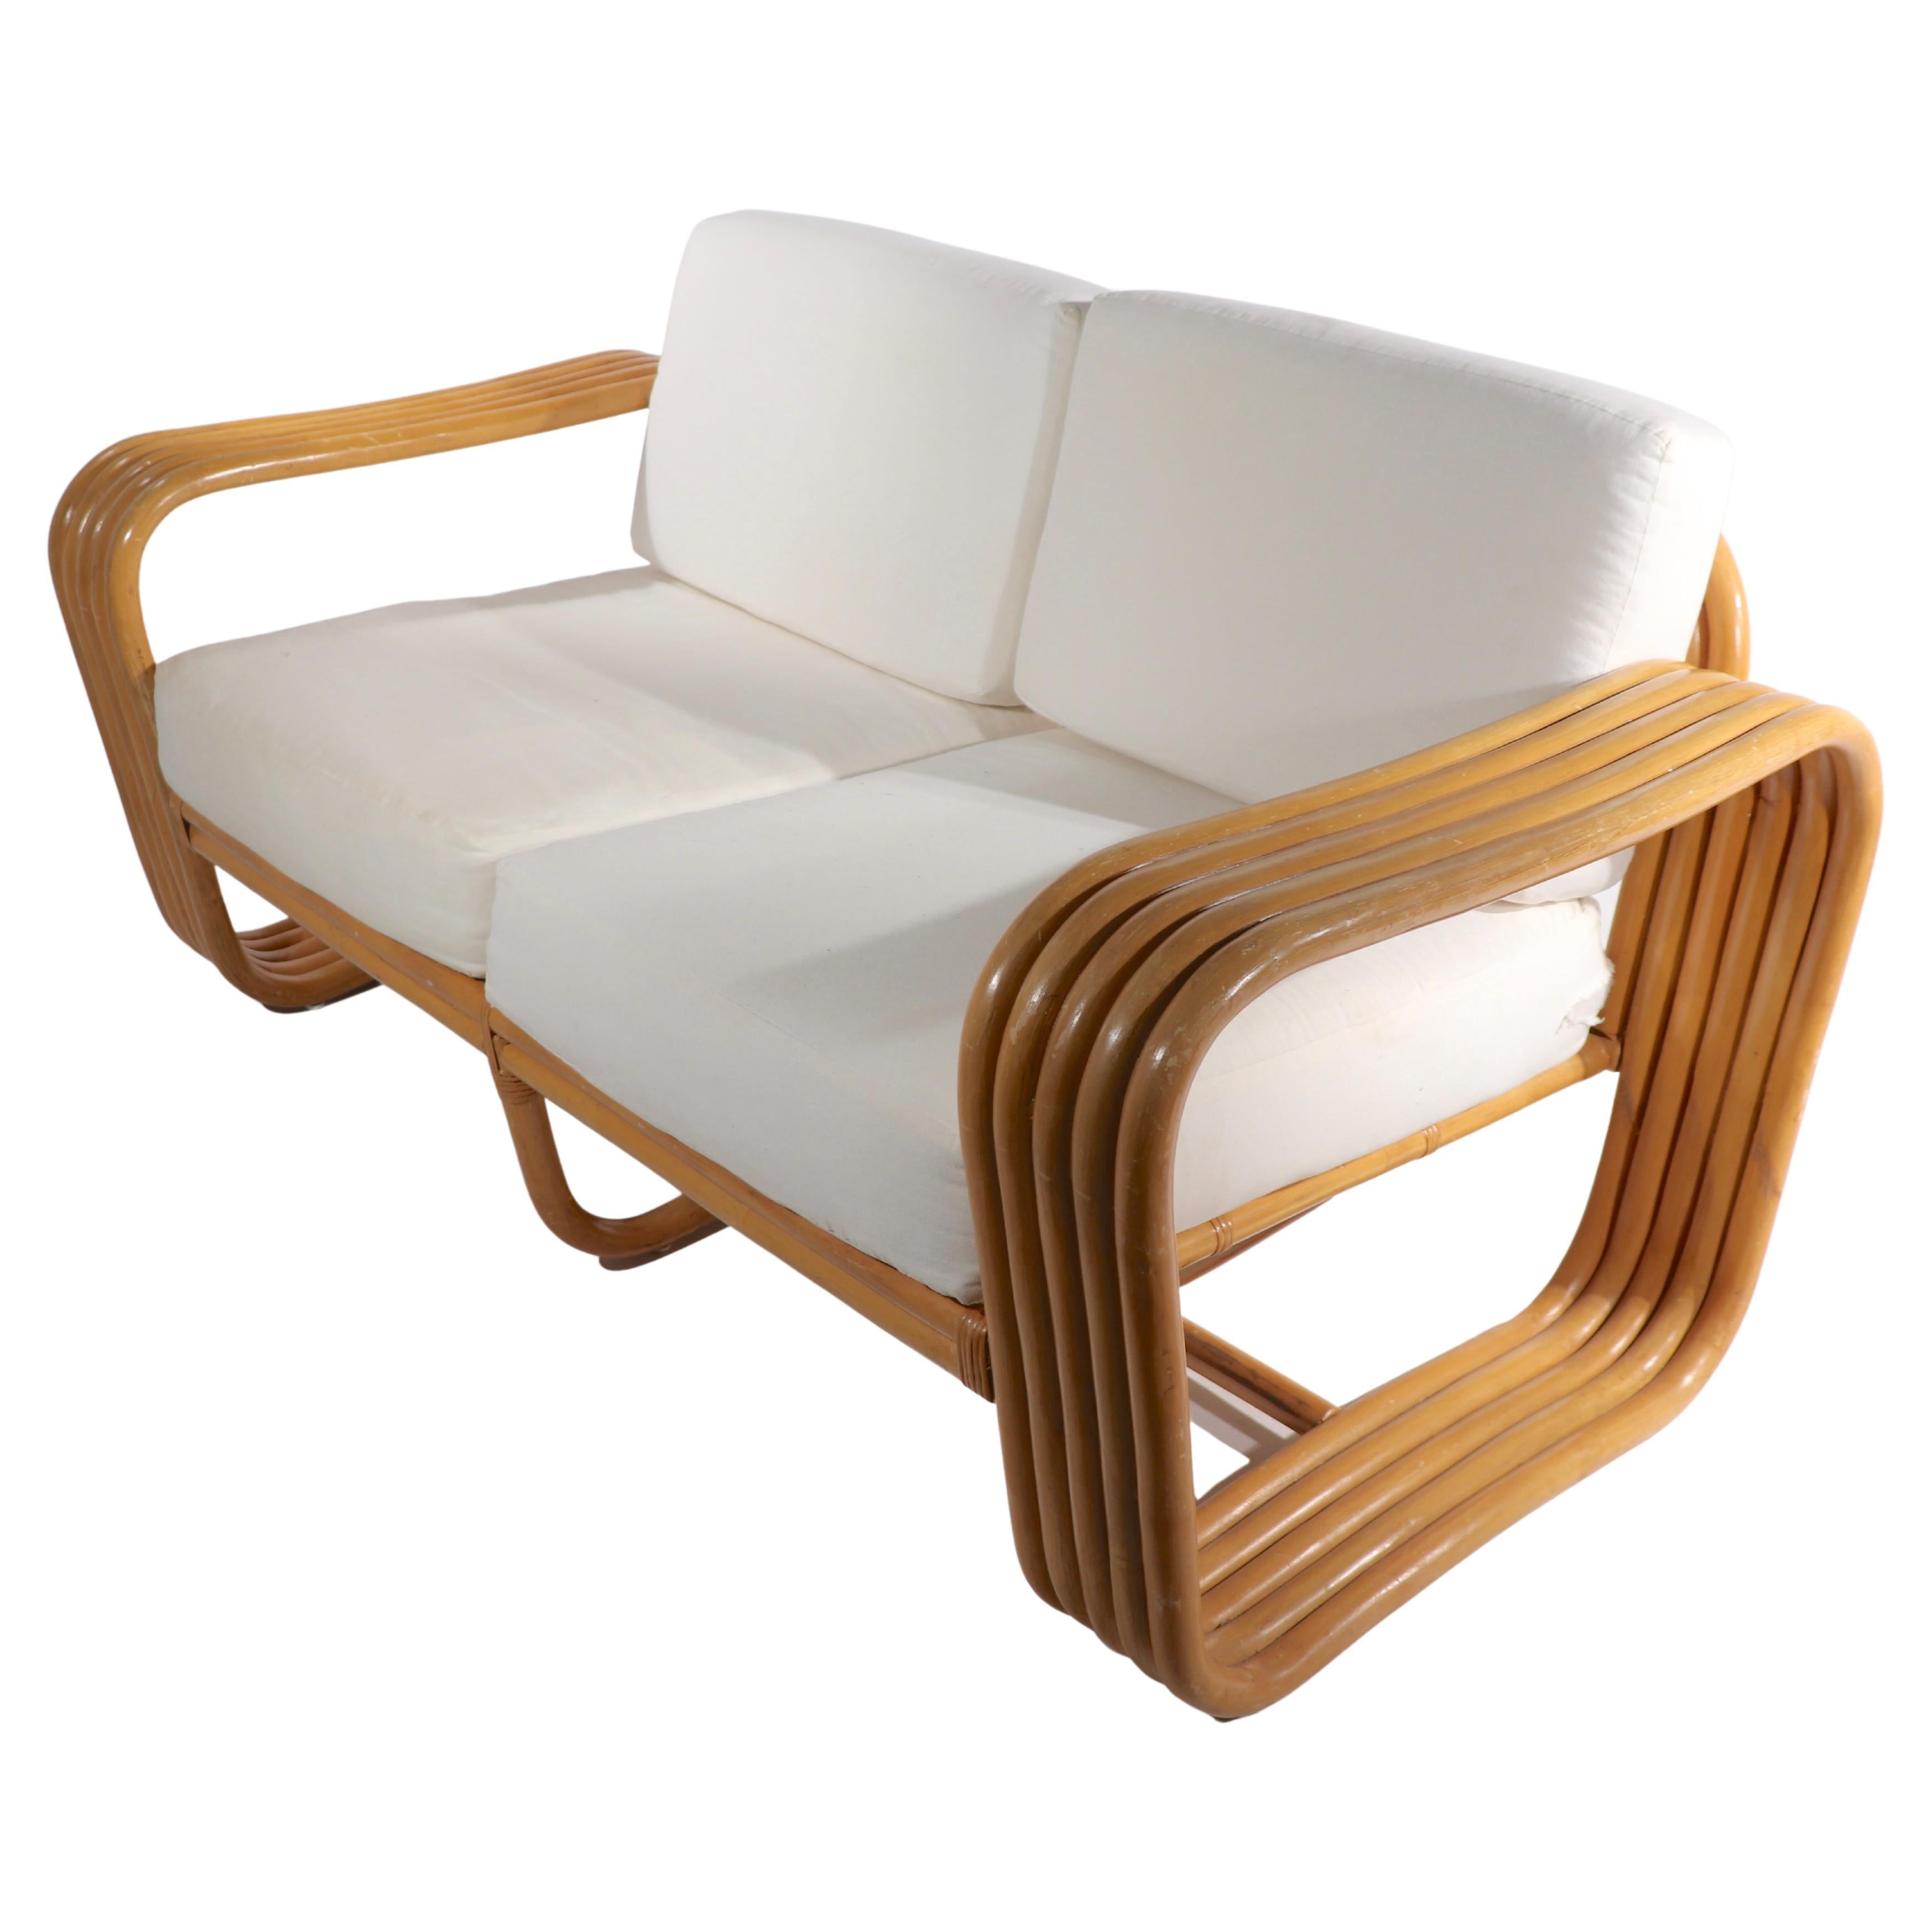 Stylish and chic Art Deco mid century bamboo loveseat, sofa. Nice wide ( 7 in. ) 5 band thick arms, good clean condition, cushions currently in muslin, ready for your fabric. Design reminiscent of Frankl, unsigned. 
Measures: Total H 30 x arm H